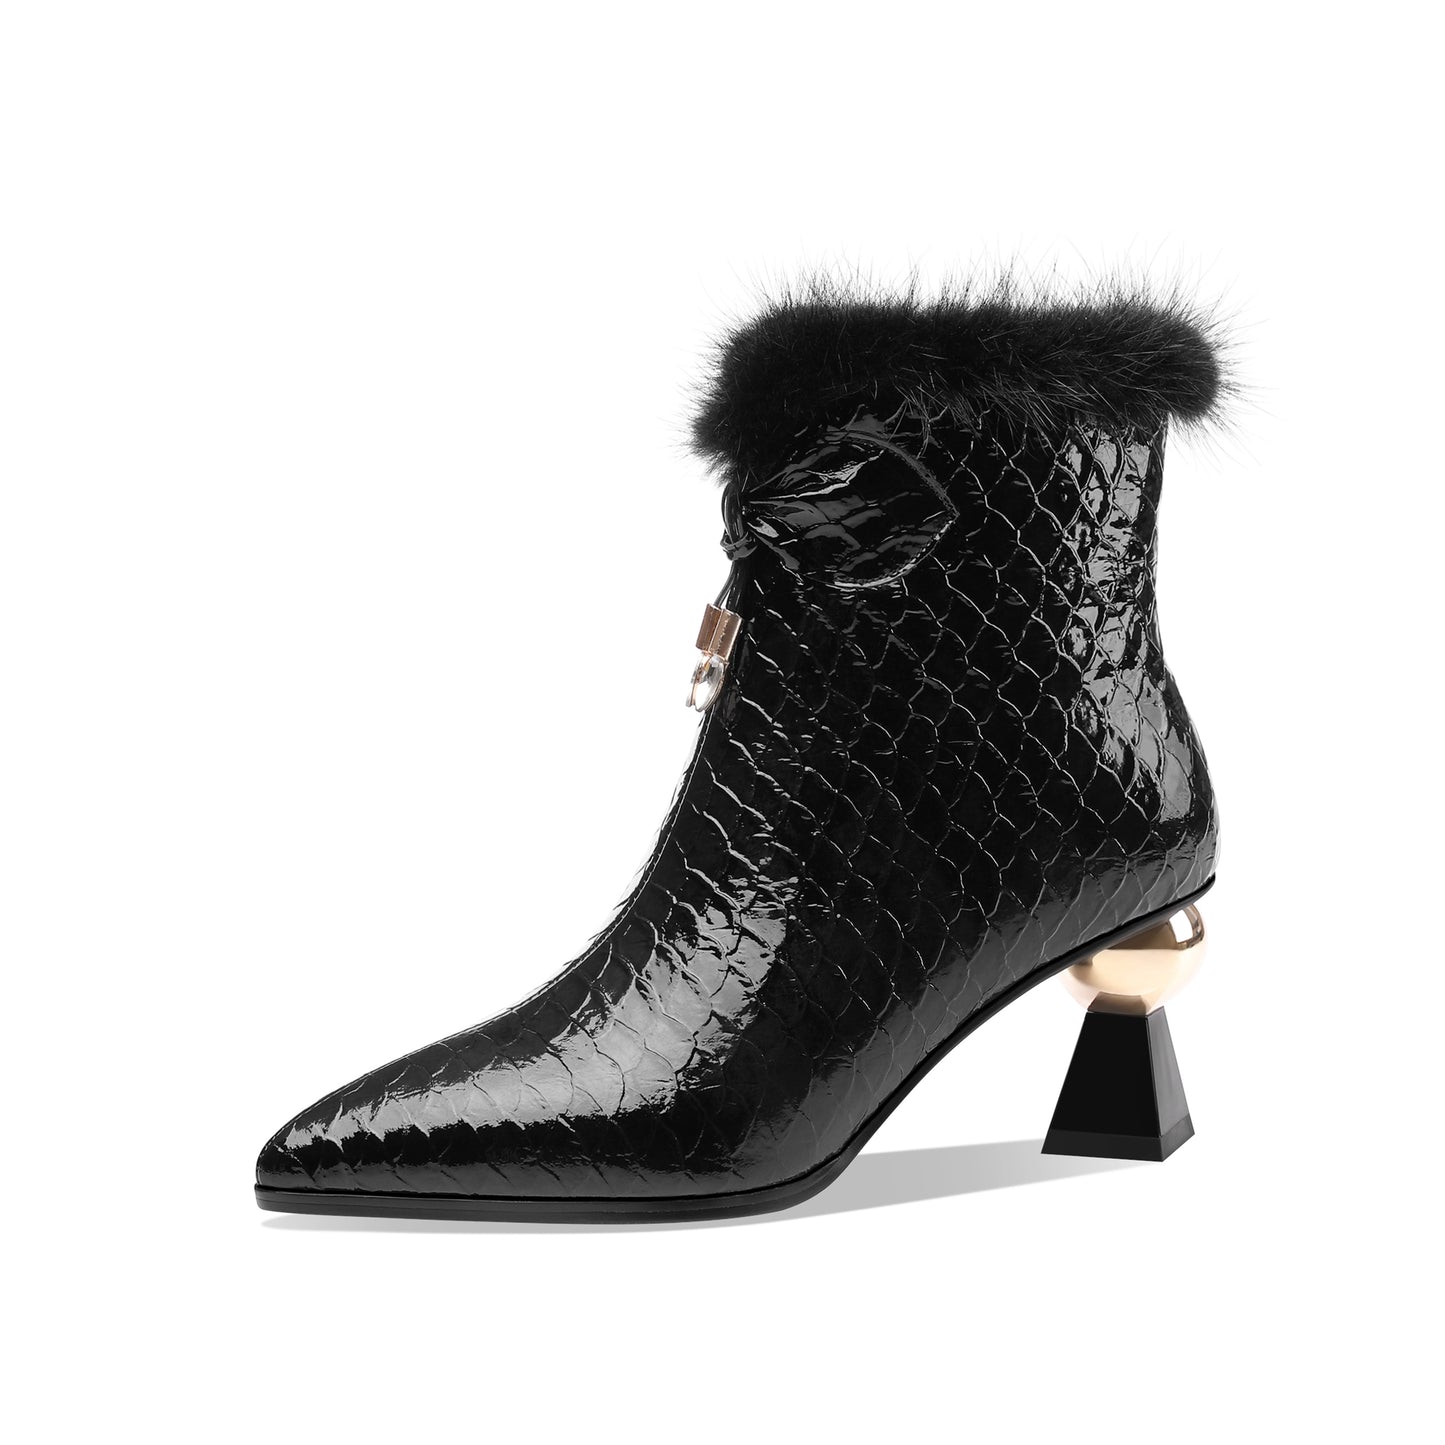 TinaCus Patent Leather Handmade Women's Pointy Toe Side Zip Up Mid Heel Crystal and Fur Design Ankle Boots with Bow